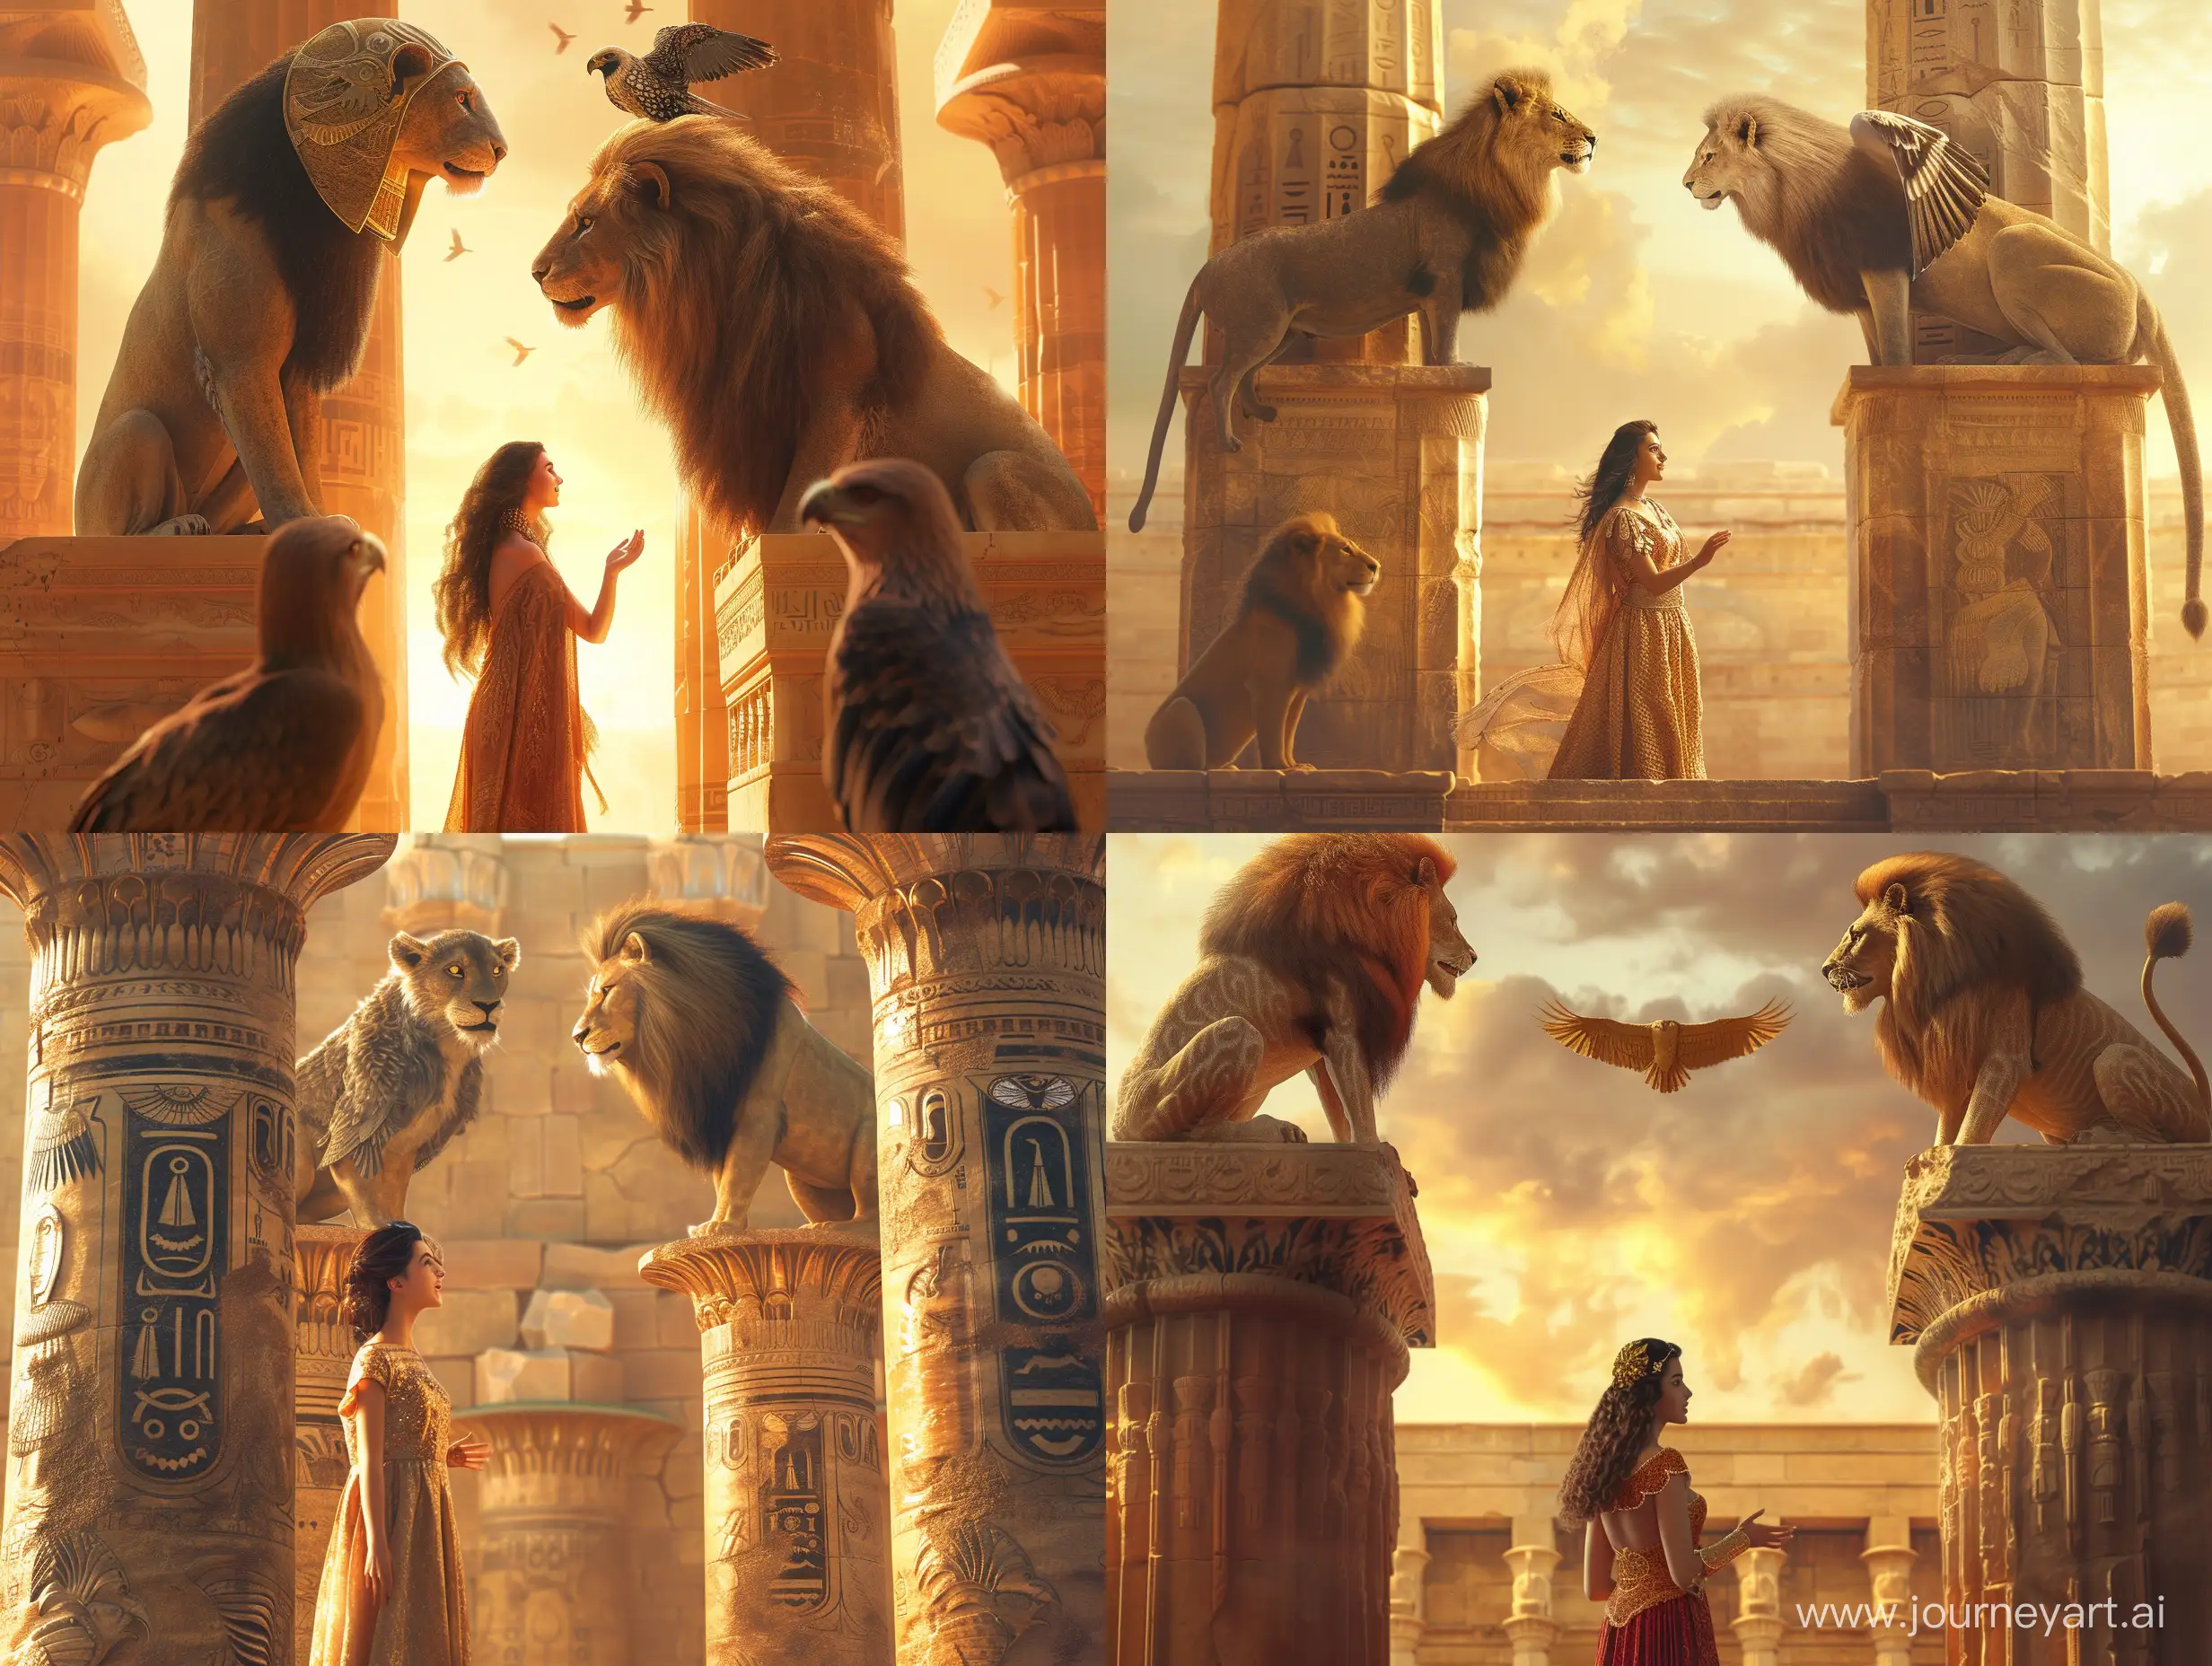 Princess-of-Persia-Conversing-with-Mythical-Creatures-at-Persepolis-Columns